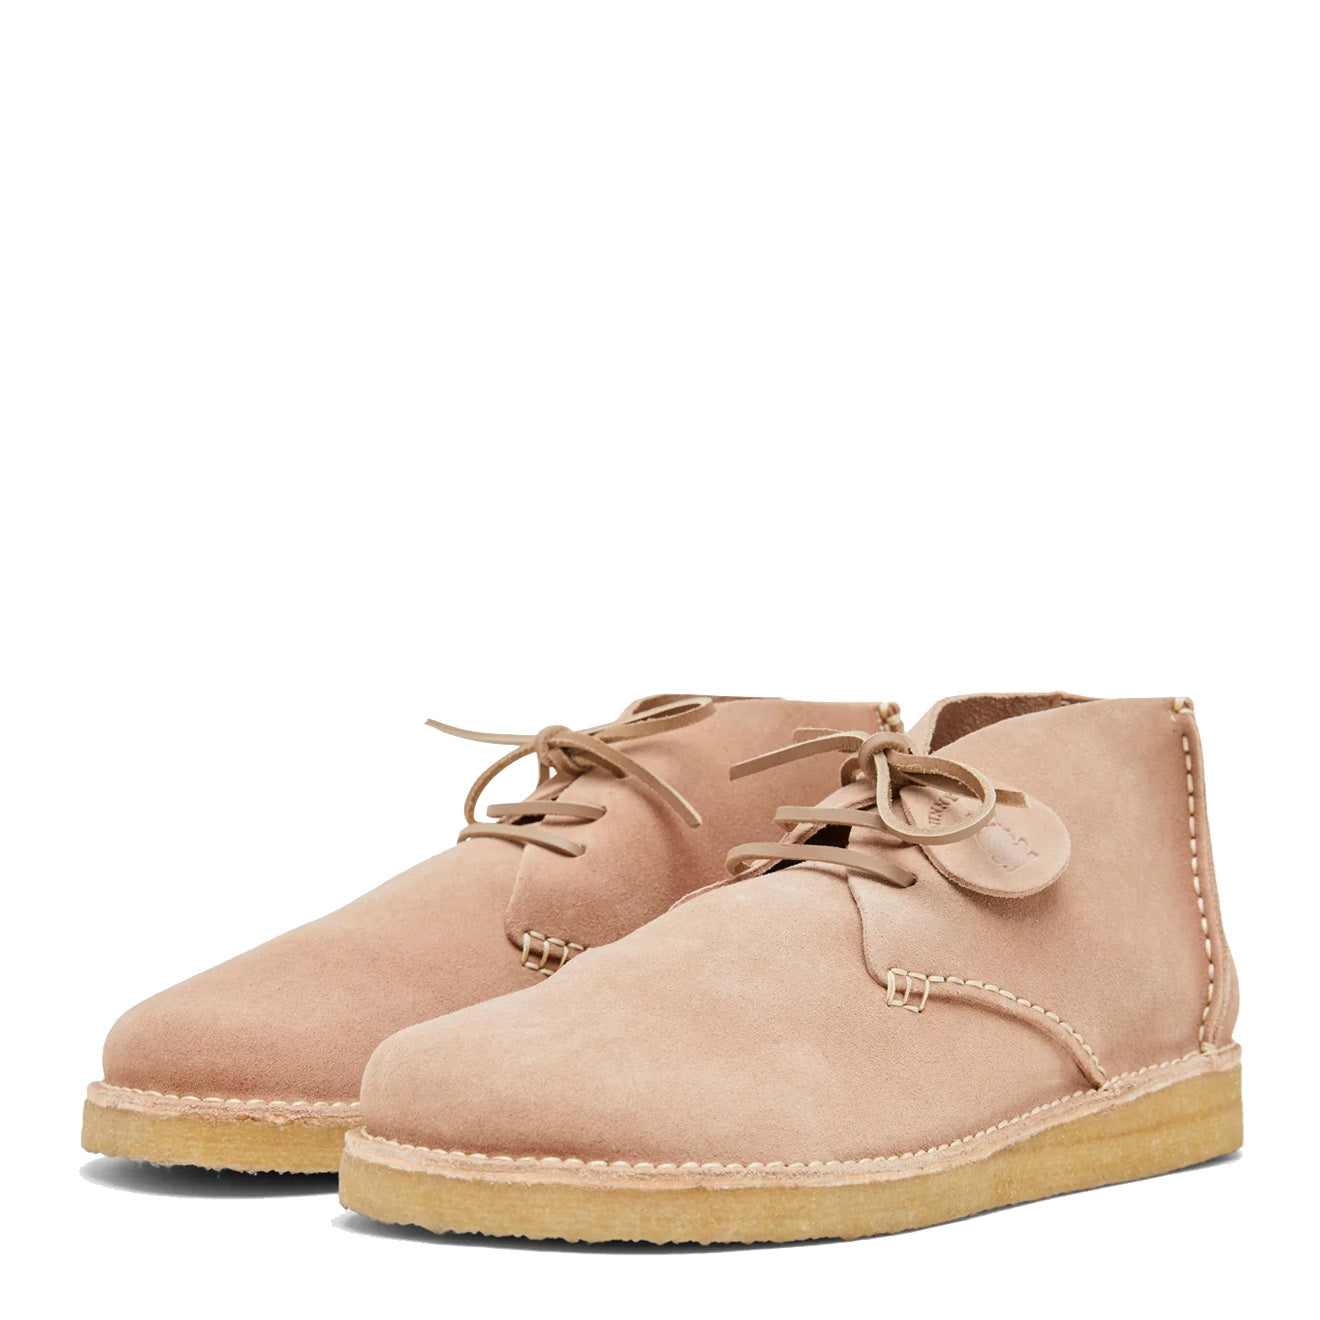 Johnny Marr Rishi Suede Boot Nude Pink